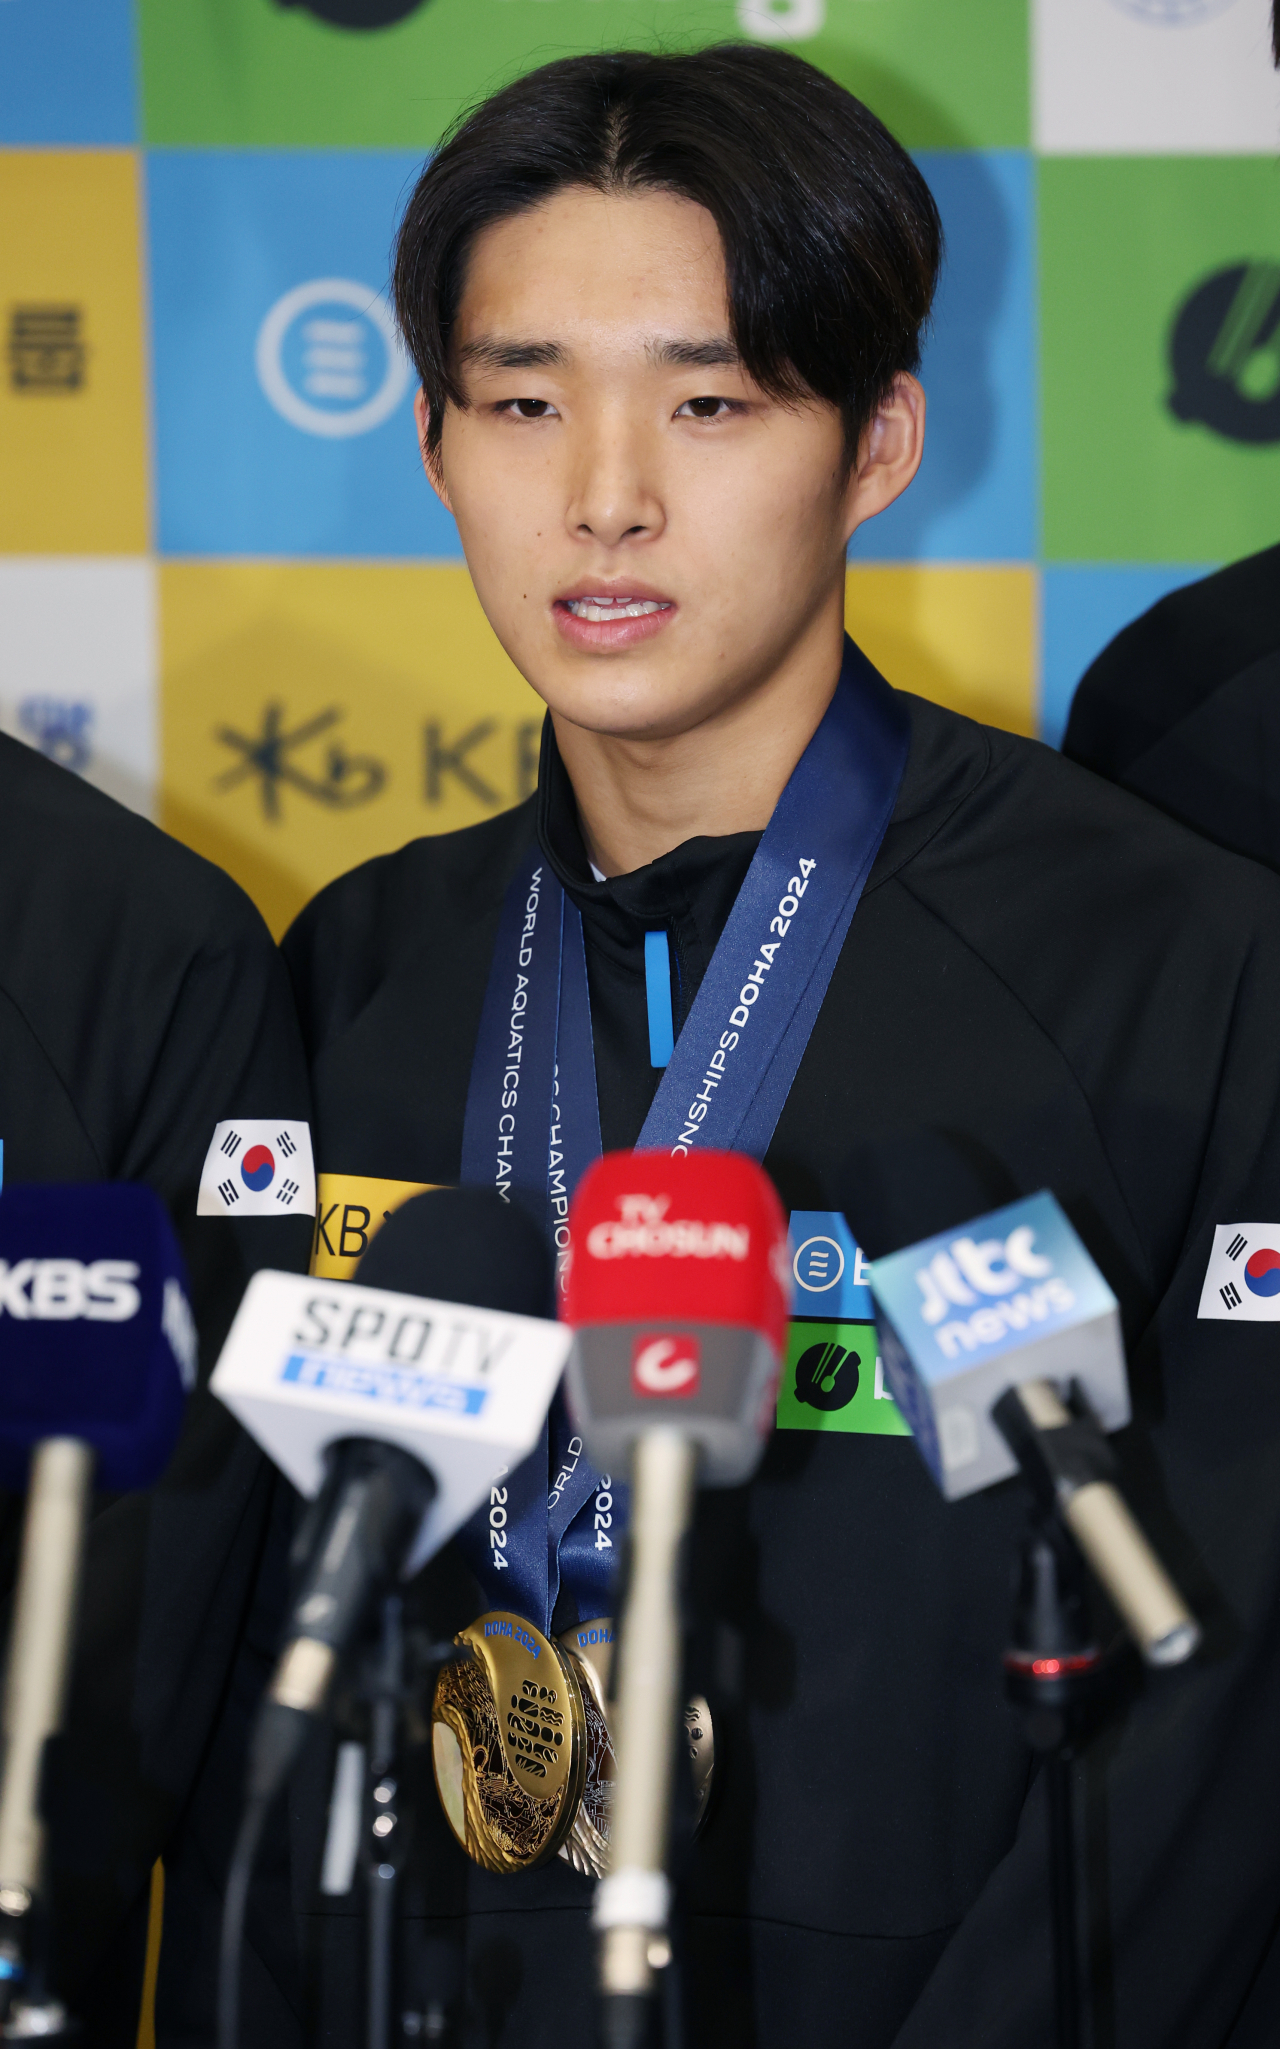 Kim Woo-min, who won the gold medal in the men's 400-meter freestyle title at the just-ended World Aquatics Championships in Doha, speaks with he press upon returning home via Incheon International Airport, west of Seoul, Monday. (Yonhap)